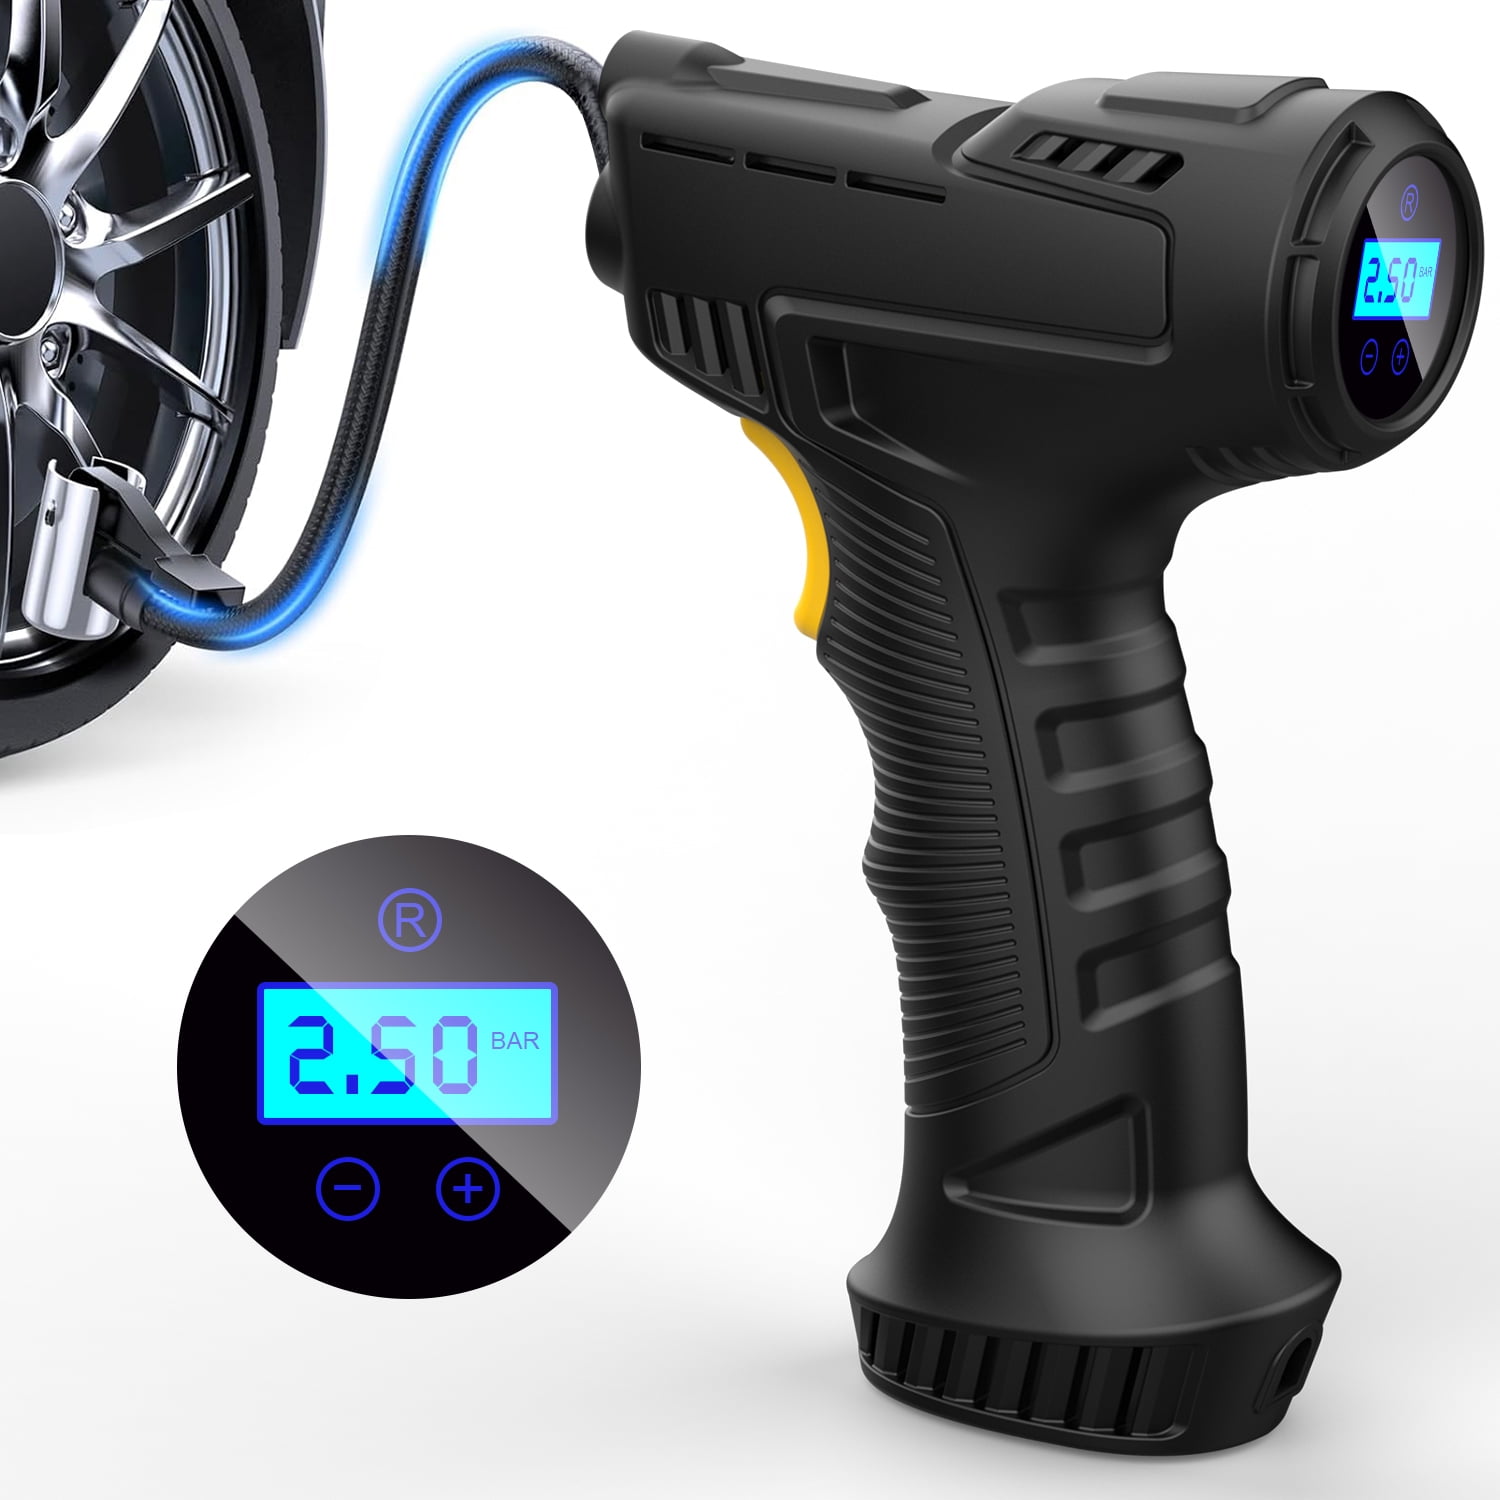 12V DC Portable 150PSI Air Compressor Car Tyre Tire Inflator Pump Auto Shut  Off LED Digital Display with Carrying Bag 